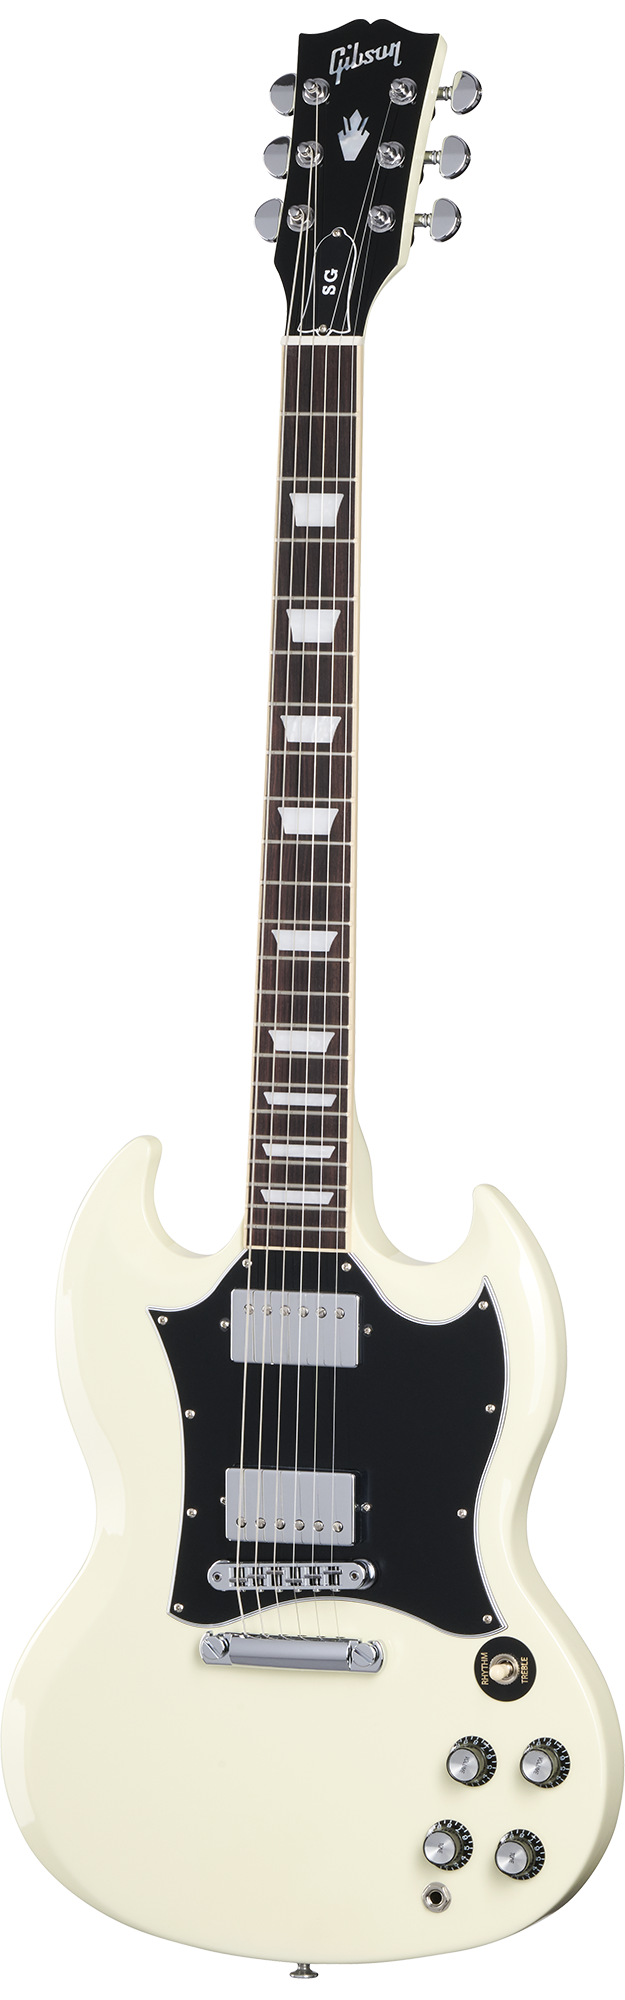 Full frontal of Gibson SG Standard Classic White.